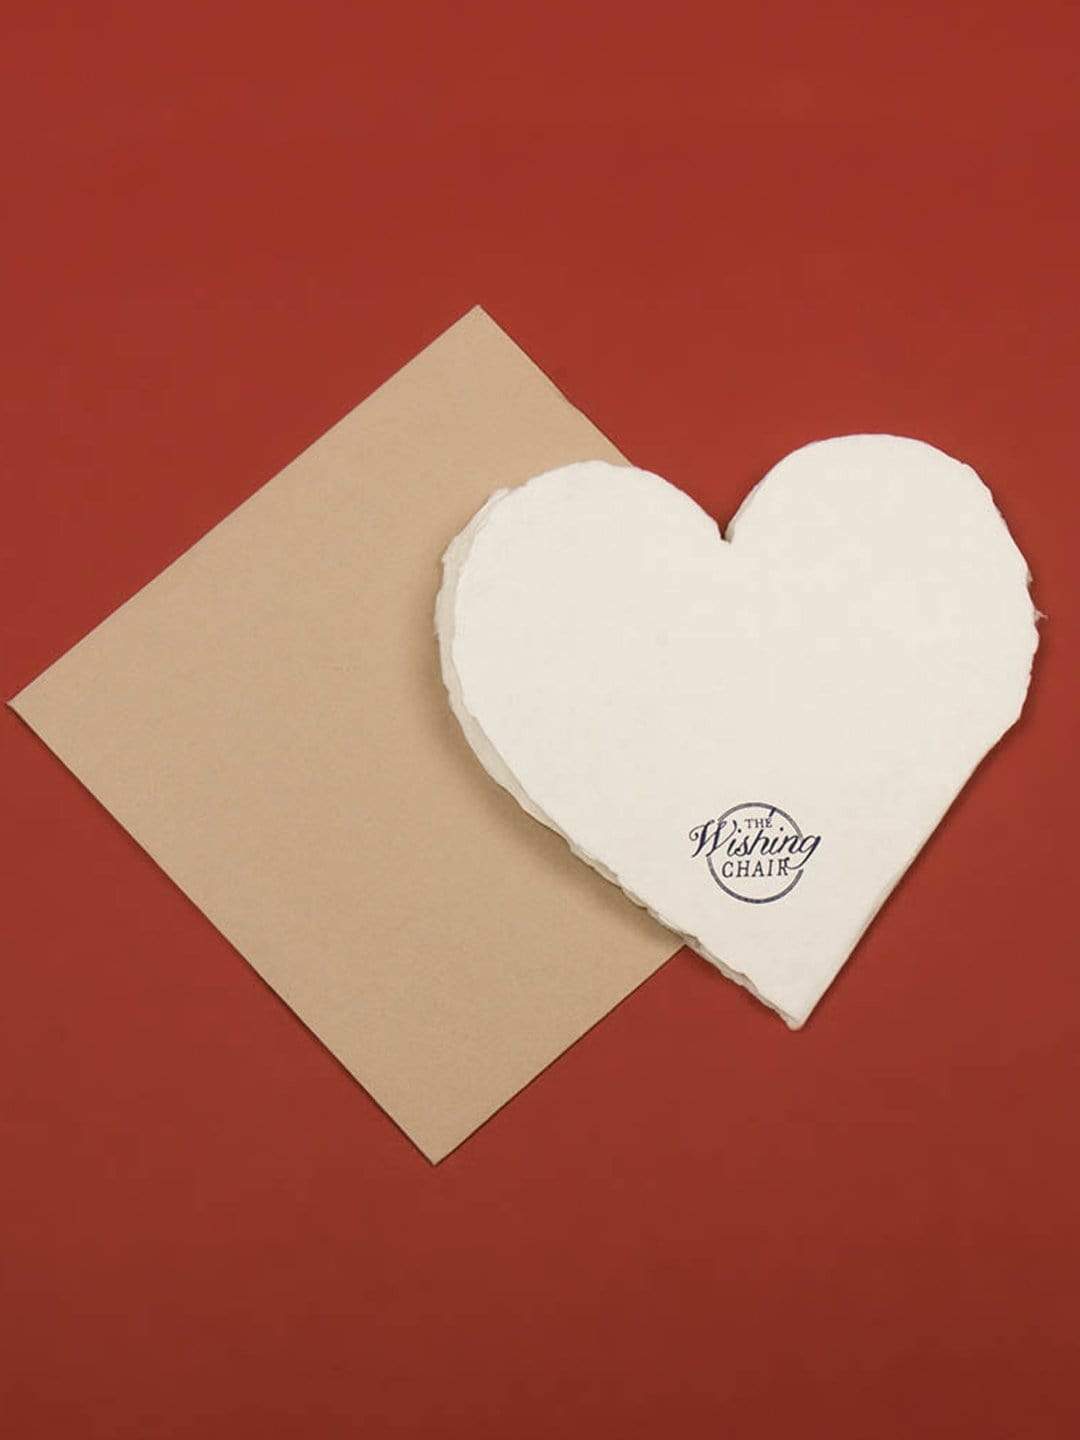 Heart Shaped Card - Mark TwainMaterial: Made of deckle-edged handmade paper
Dimensions: 6"X6"

Do not bend, Keep away from moisture

 Heart Shaped Card - Mark TwainThe Wishing Chair